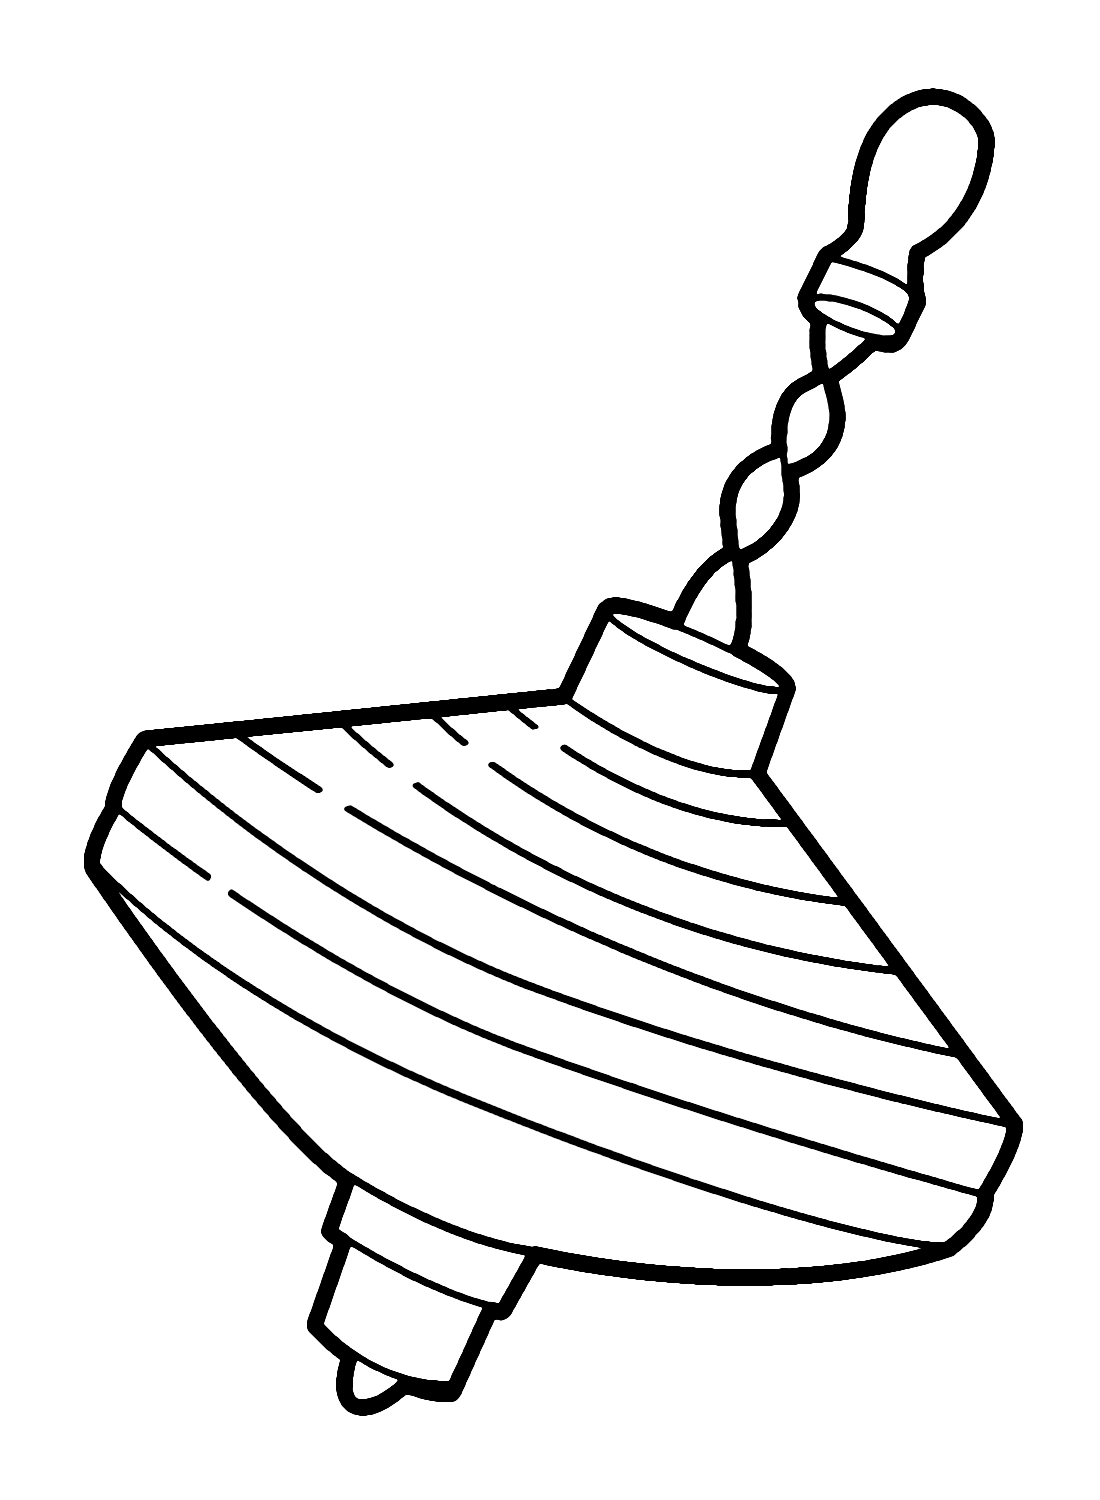 Whirligig to Print Coloring Page